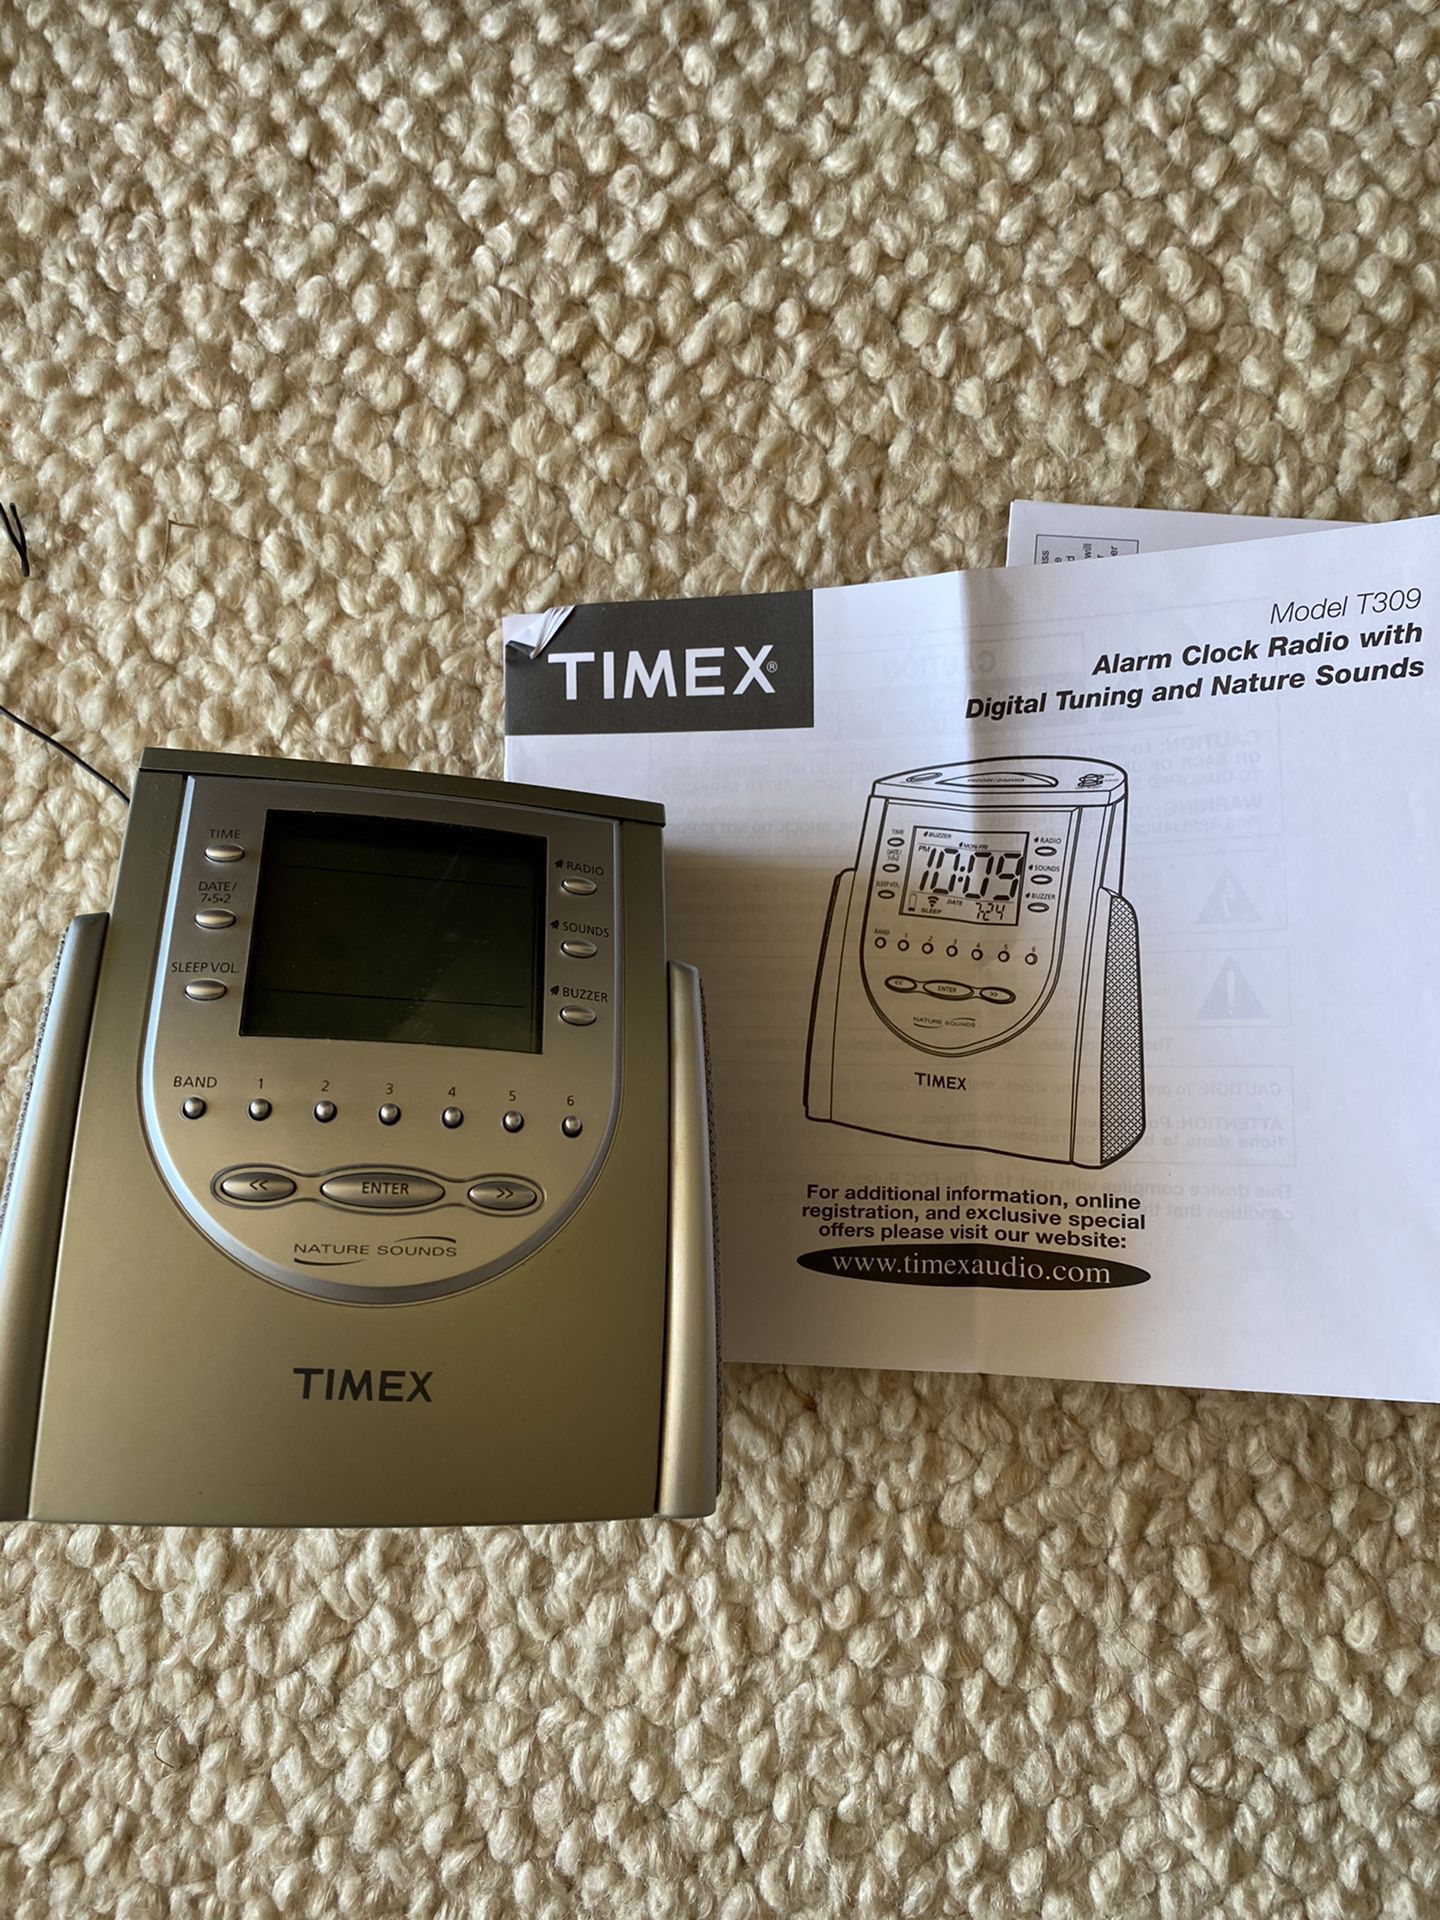 Timex alarm clock with radio and nature sounds